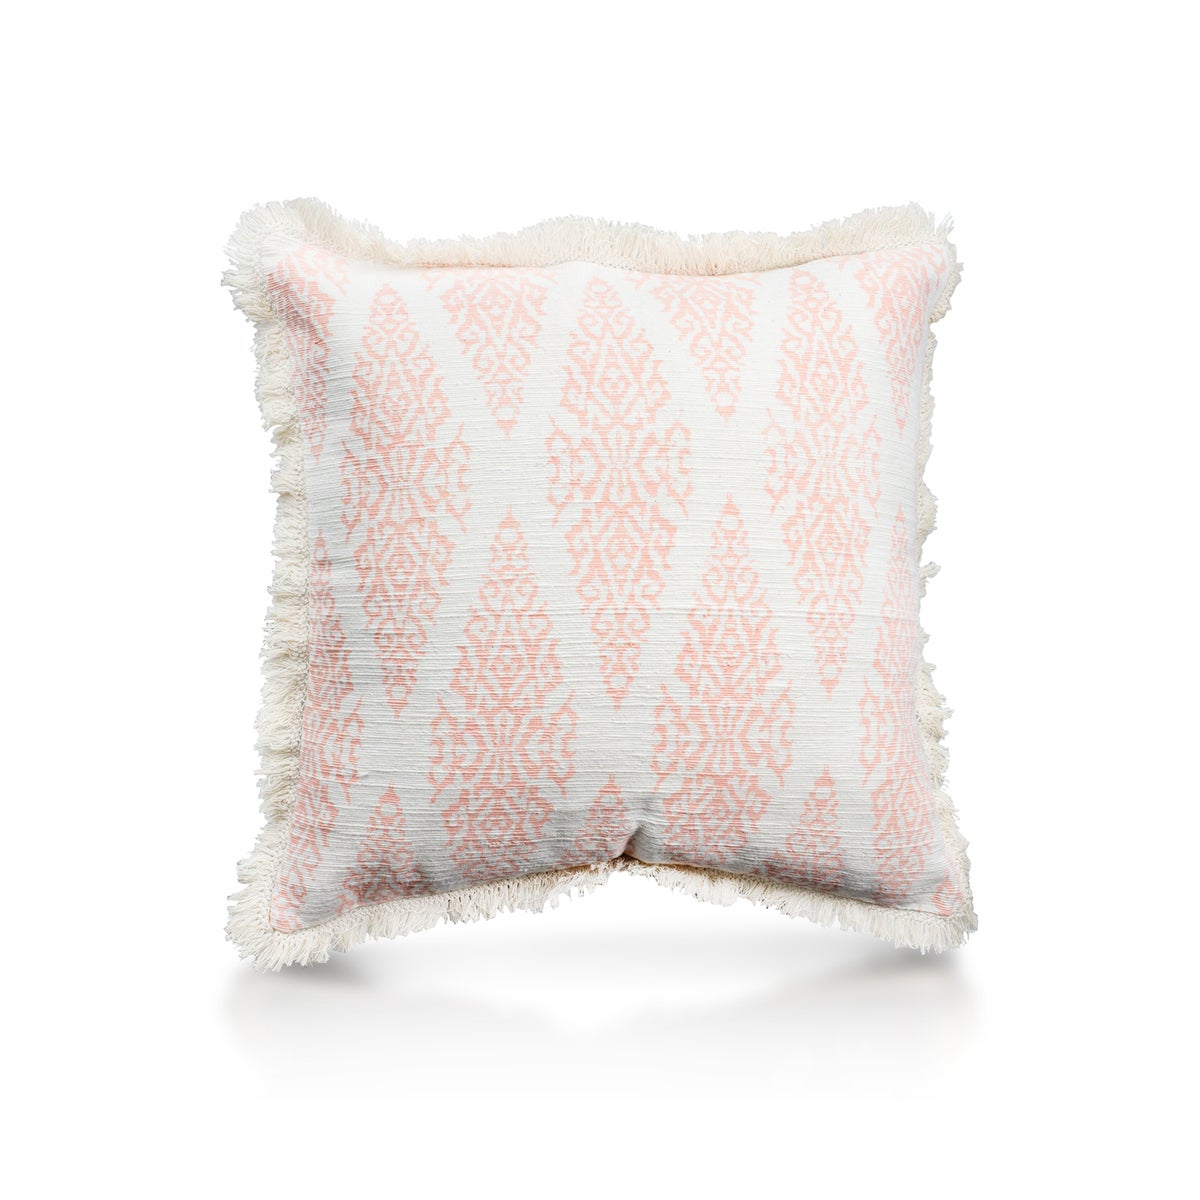 Pillow, 20" with Fringe - Ikat, Coral